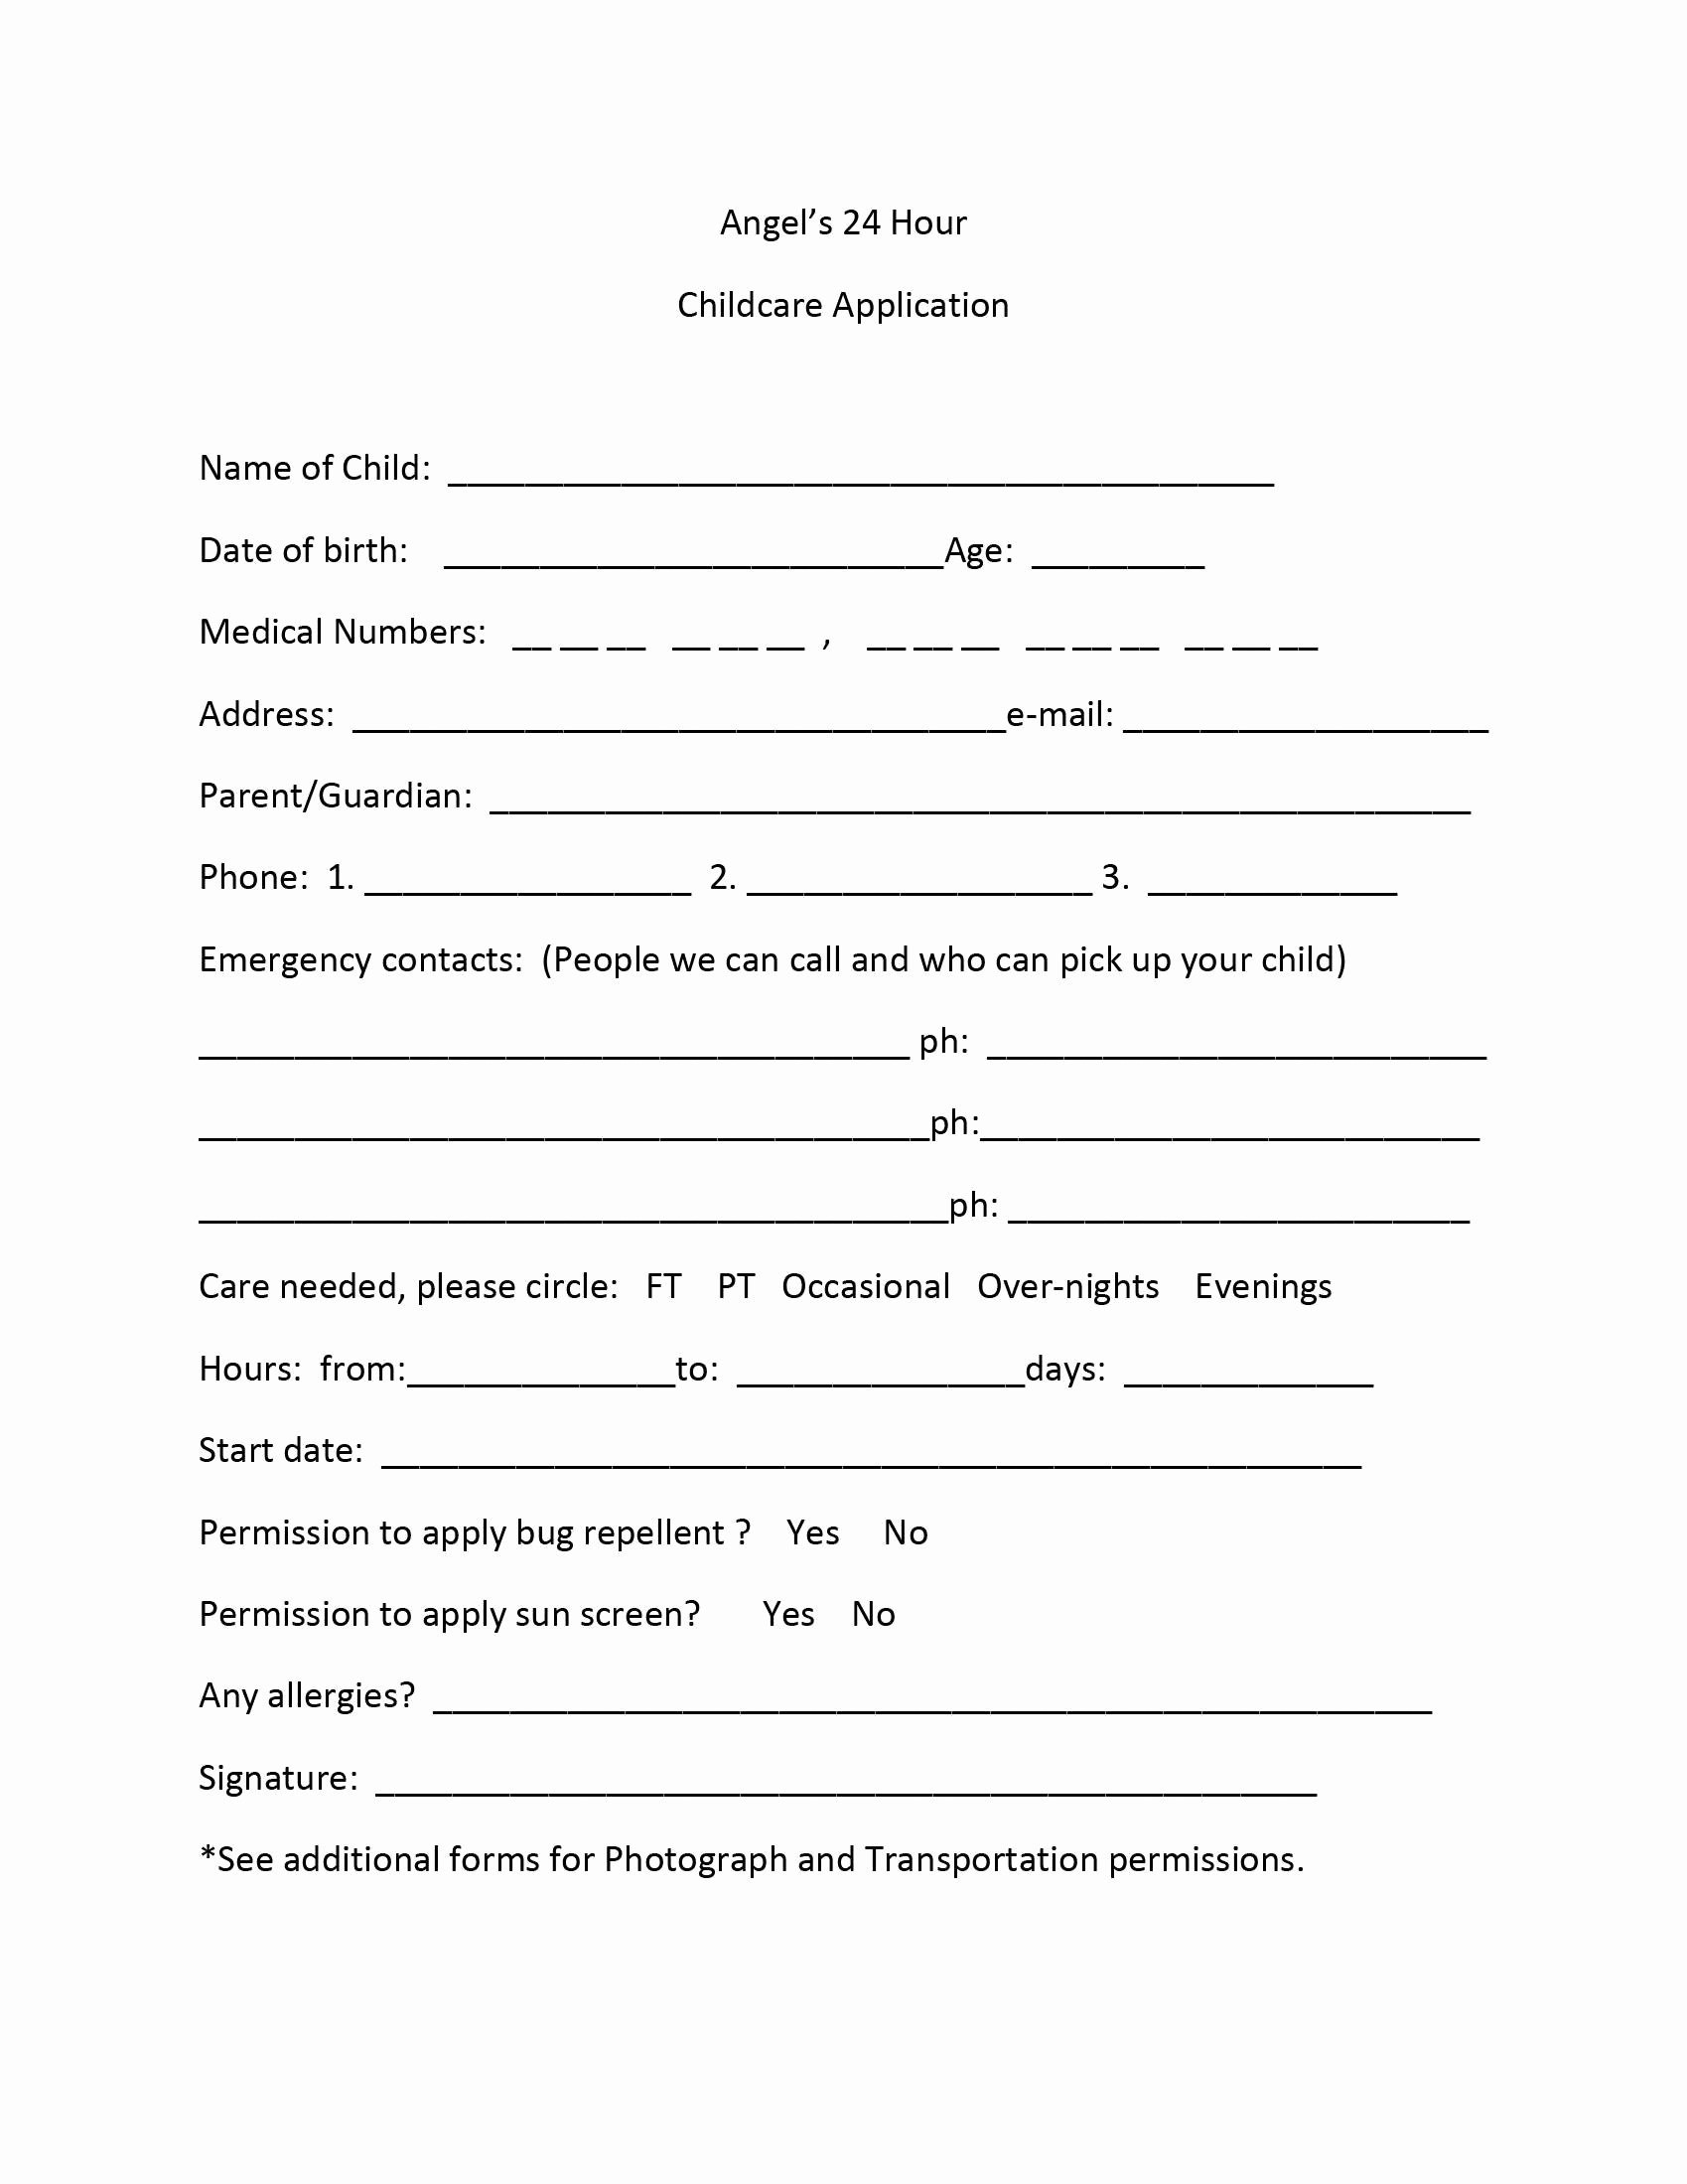 Child Care Application Template Luxury Application form